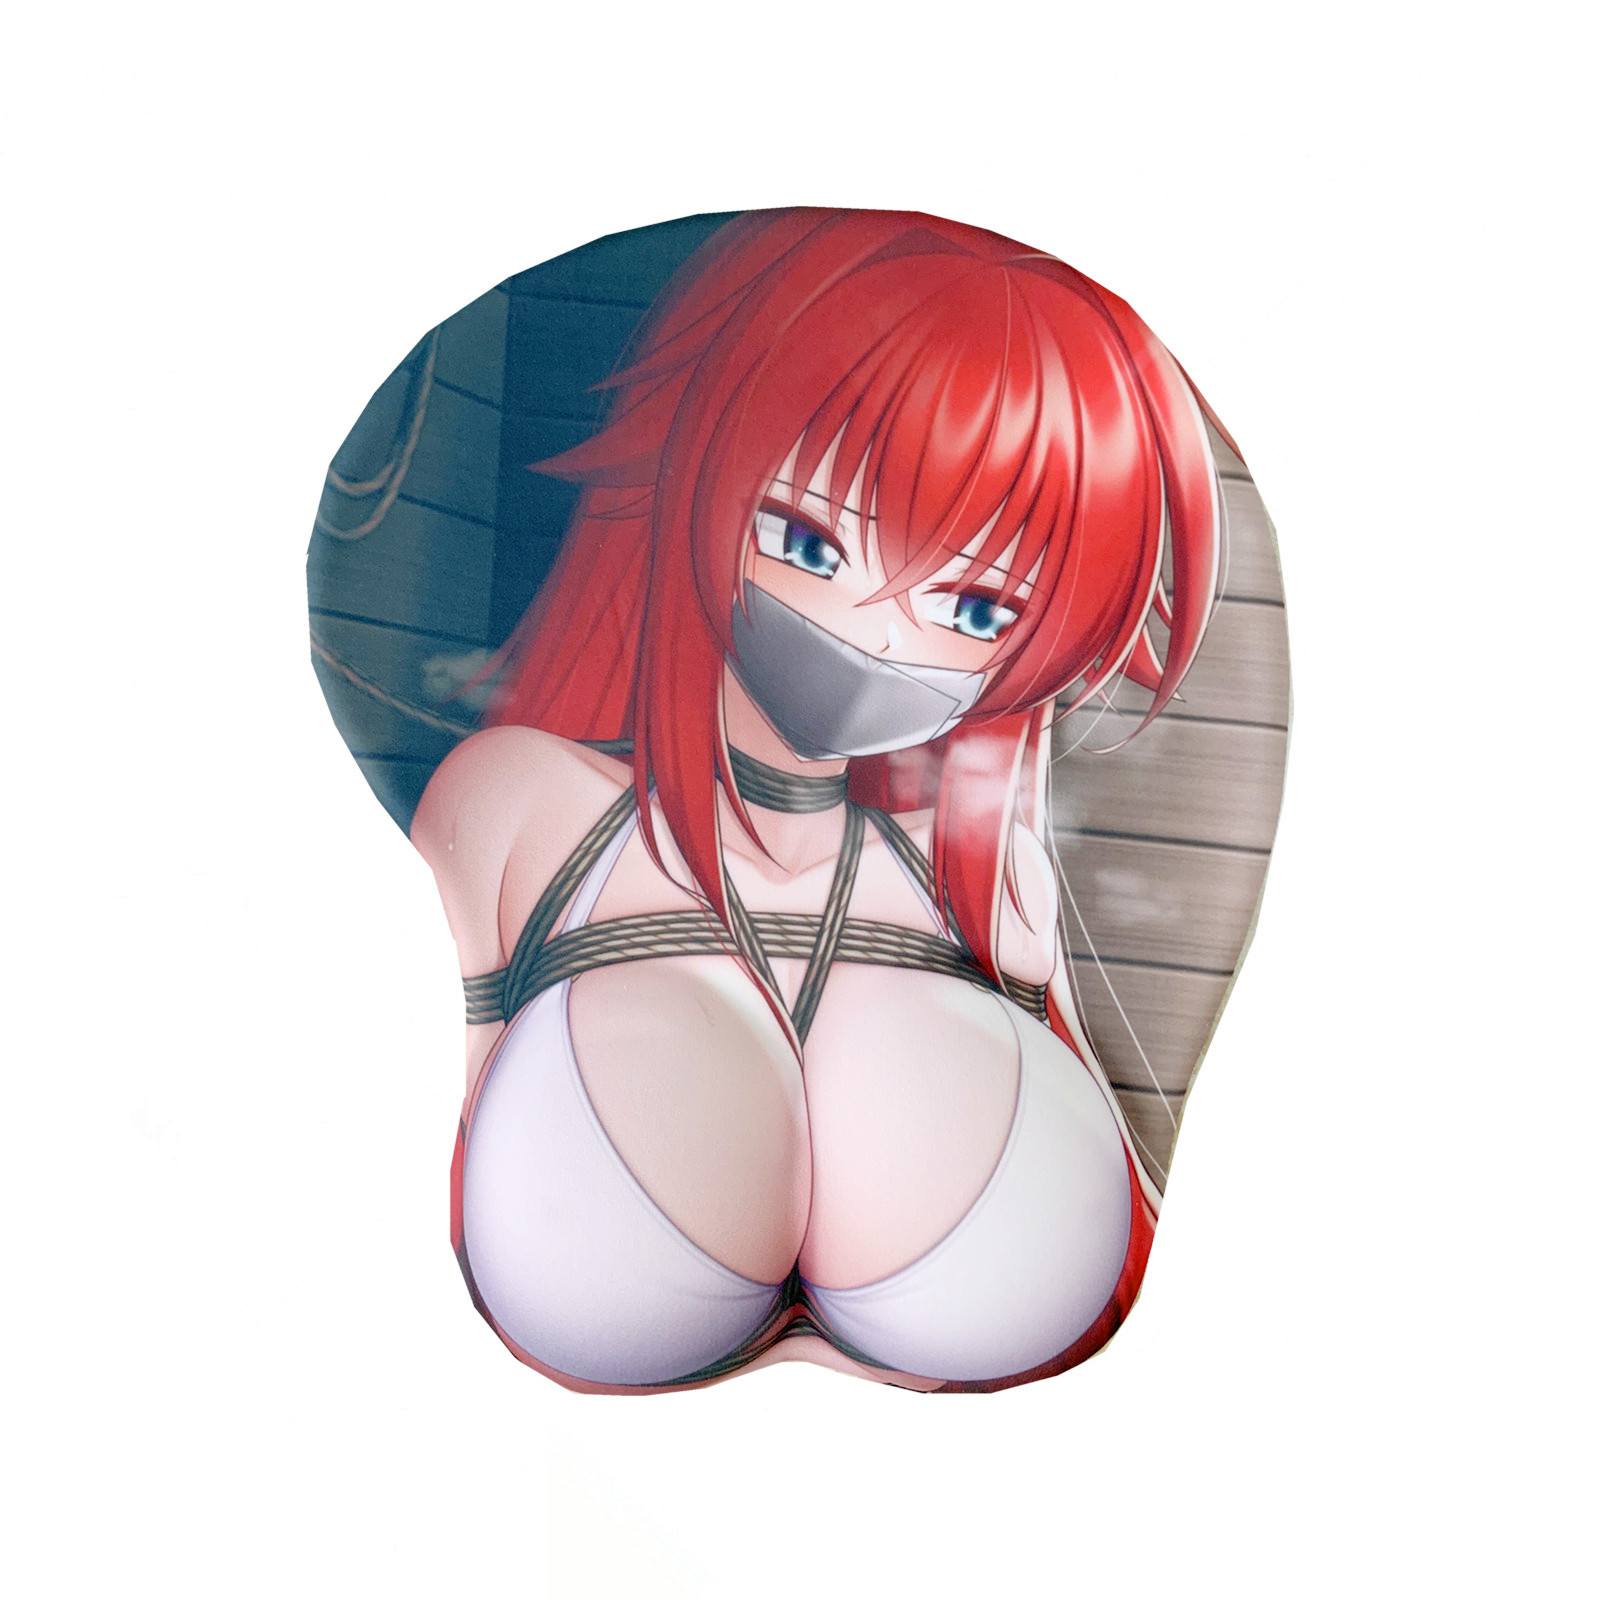 HighSchool dxd Rias Gremory Anime 3D Mouse Pads Soft Breast Sexy Butt Wrist Rest Oppai